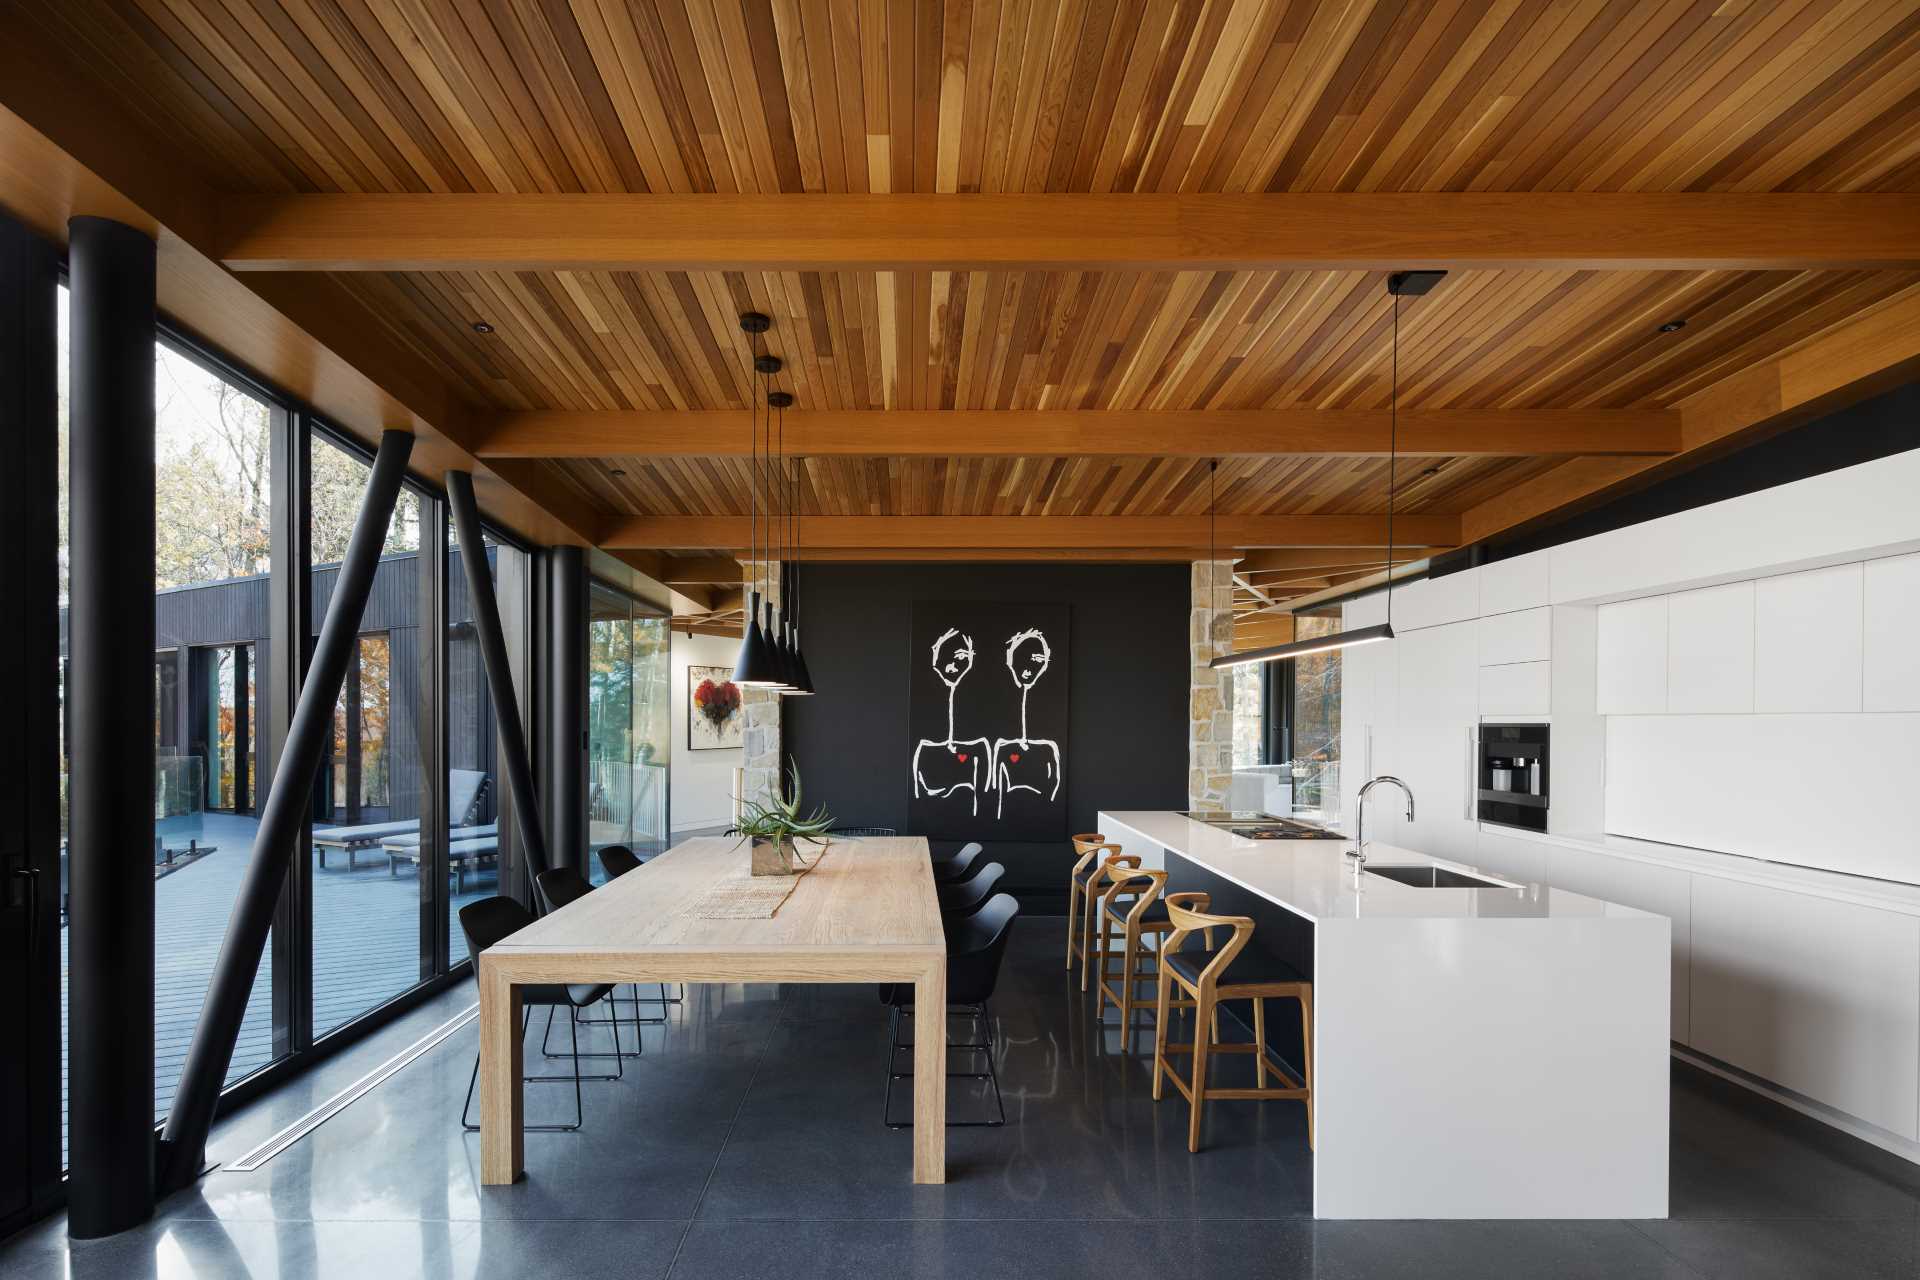 The light materials of this open-plan dining area and kitchen contrast the black accents of the structure, walls, and exterior.